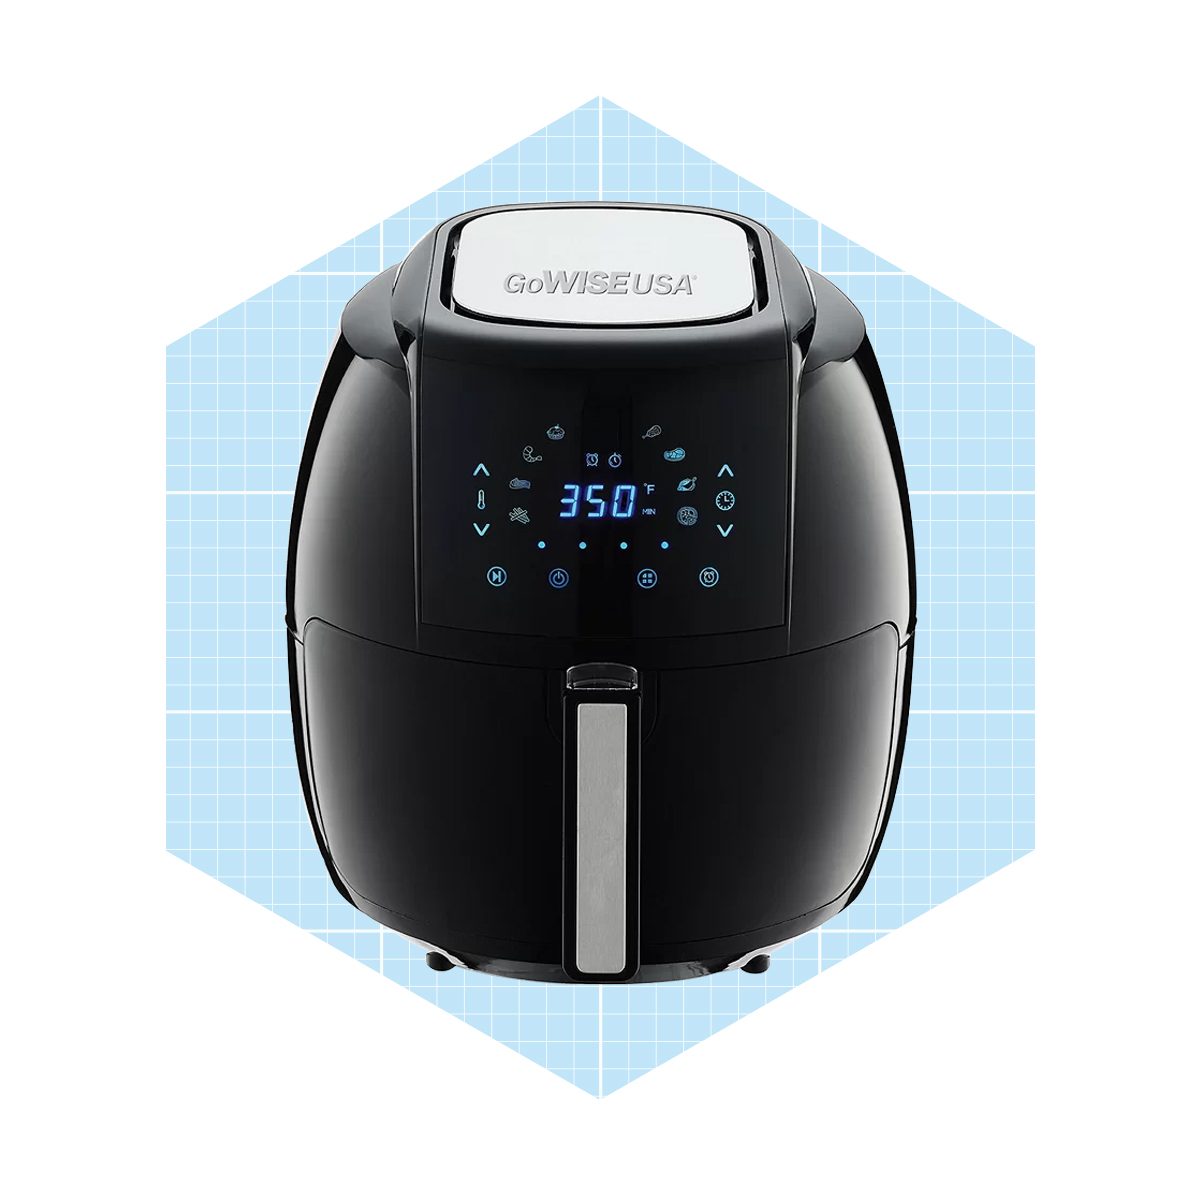 Gowise Usa 5.5 Liter 8 In 1 Electric Air Fryer Ecomm Wayyfair.com